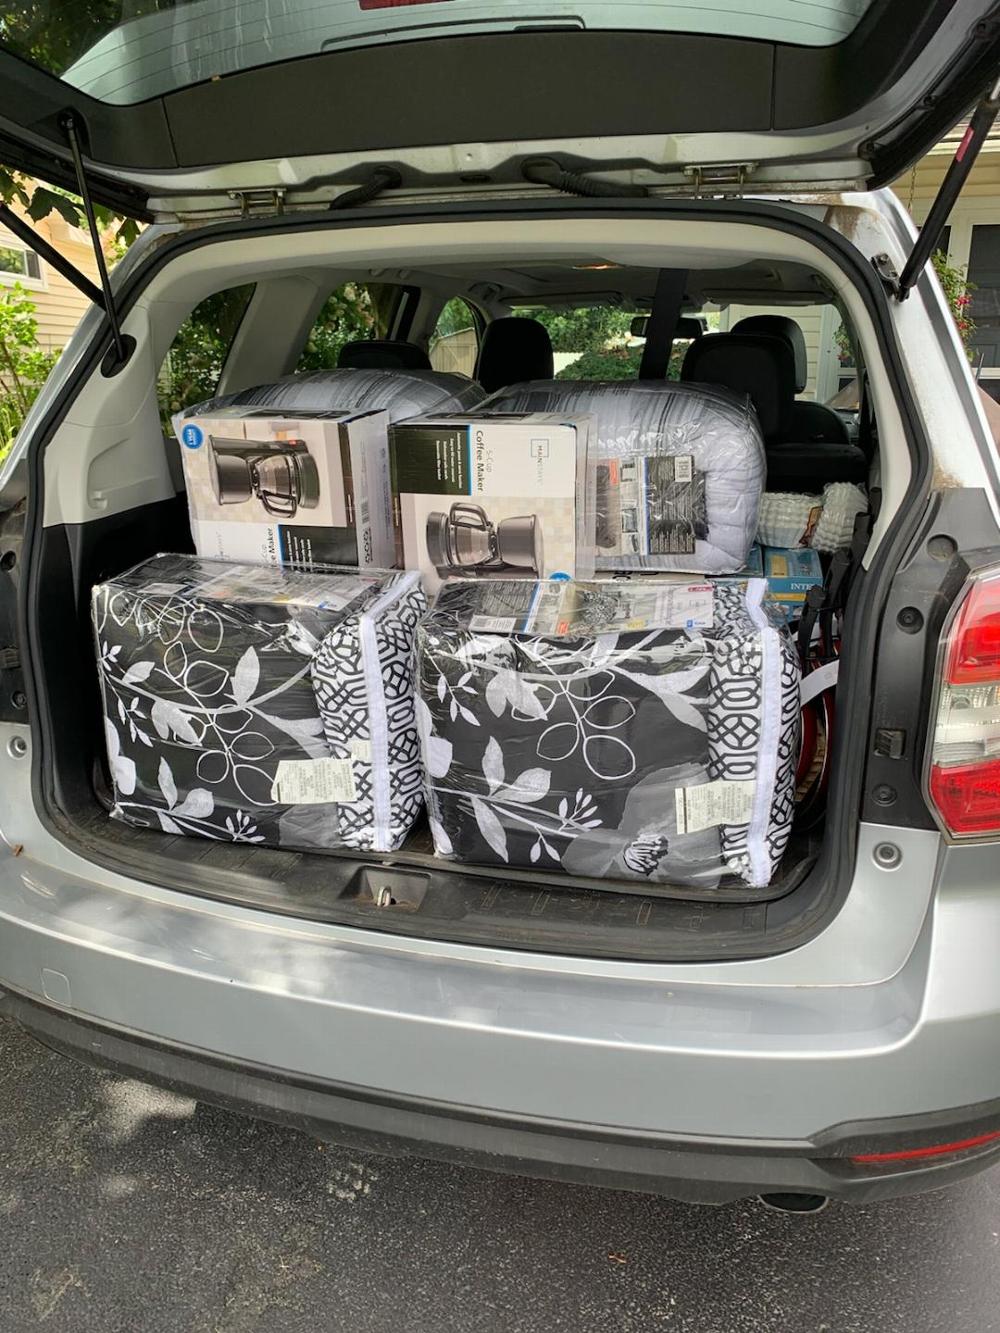 One of many trunk loads of goods supplied to the vets re-homing project. By mid-December 2019, the Lodge had assisted in re-homing over 140 homeless vets.